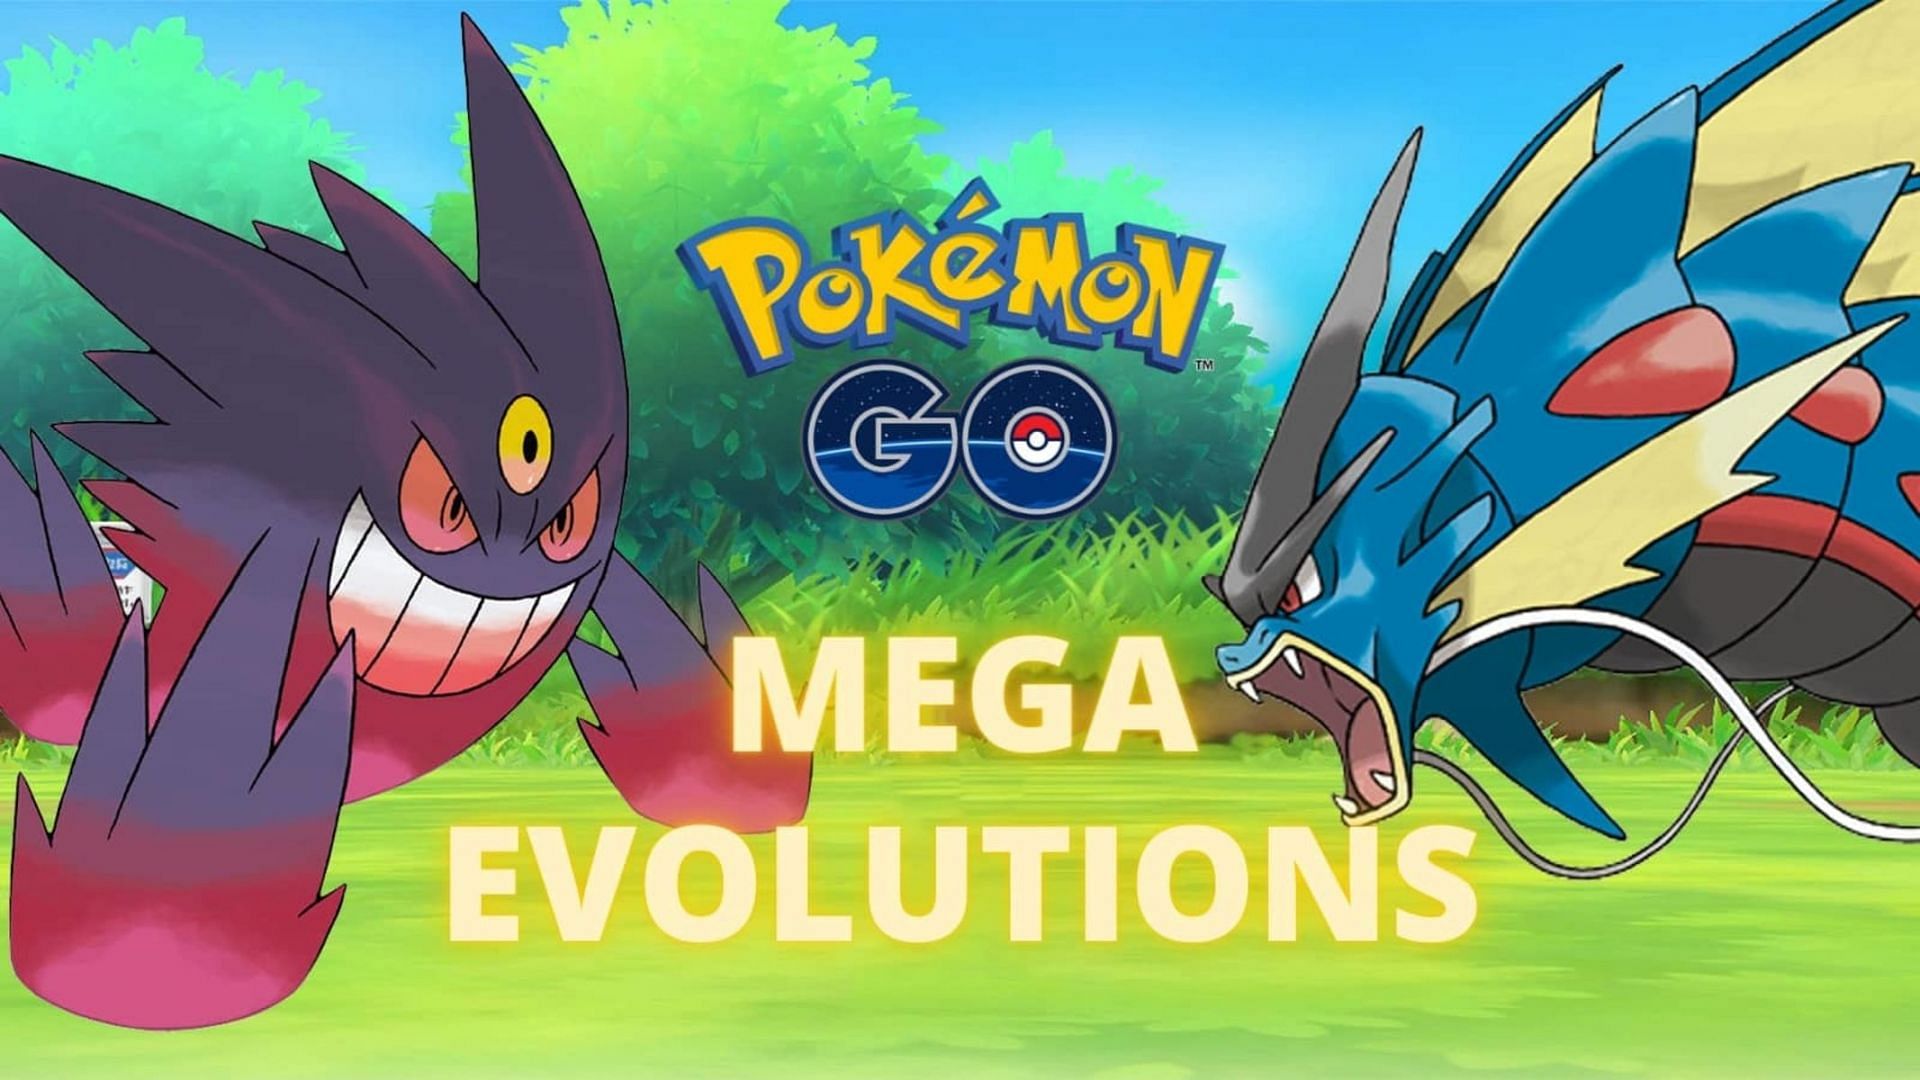 I wanted a side-by-side comparison of the new Mega Evolutions and